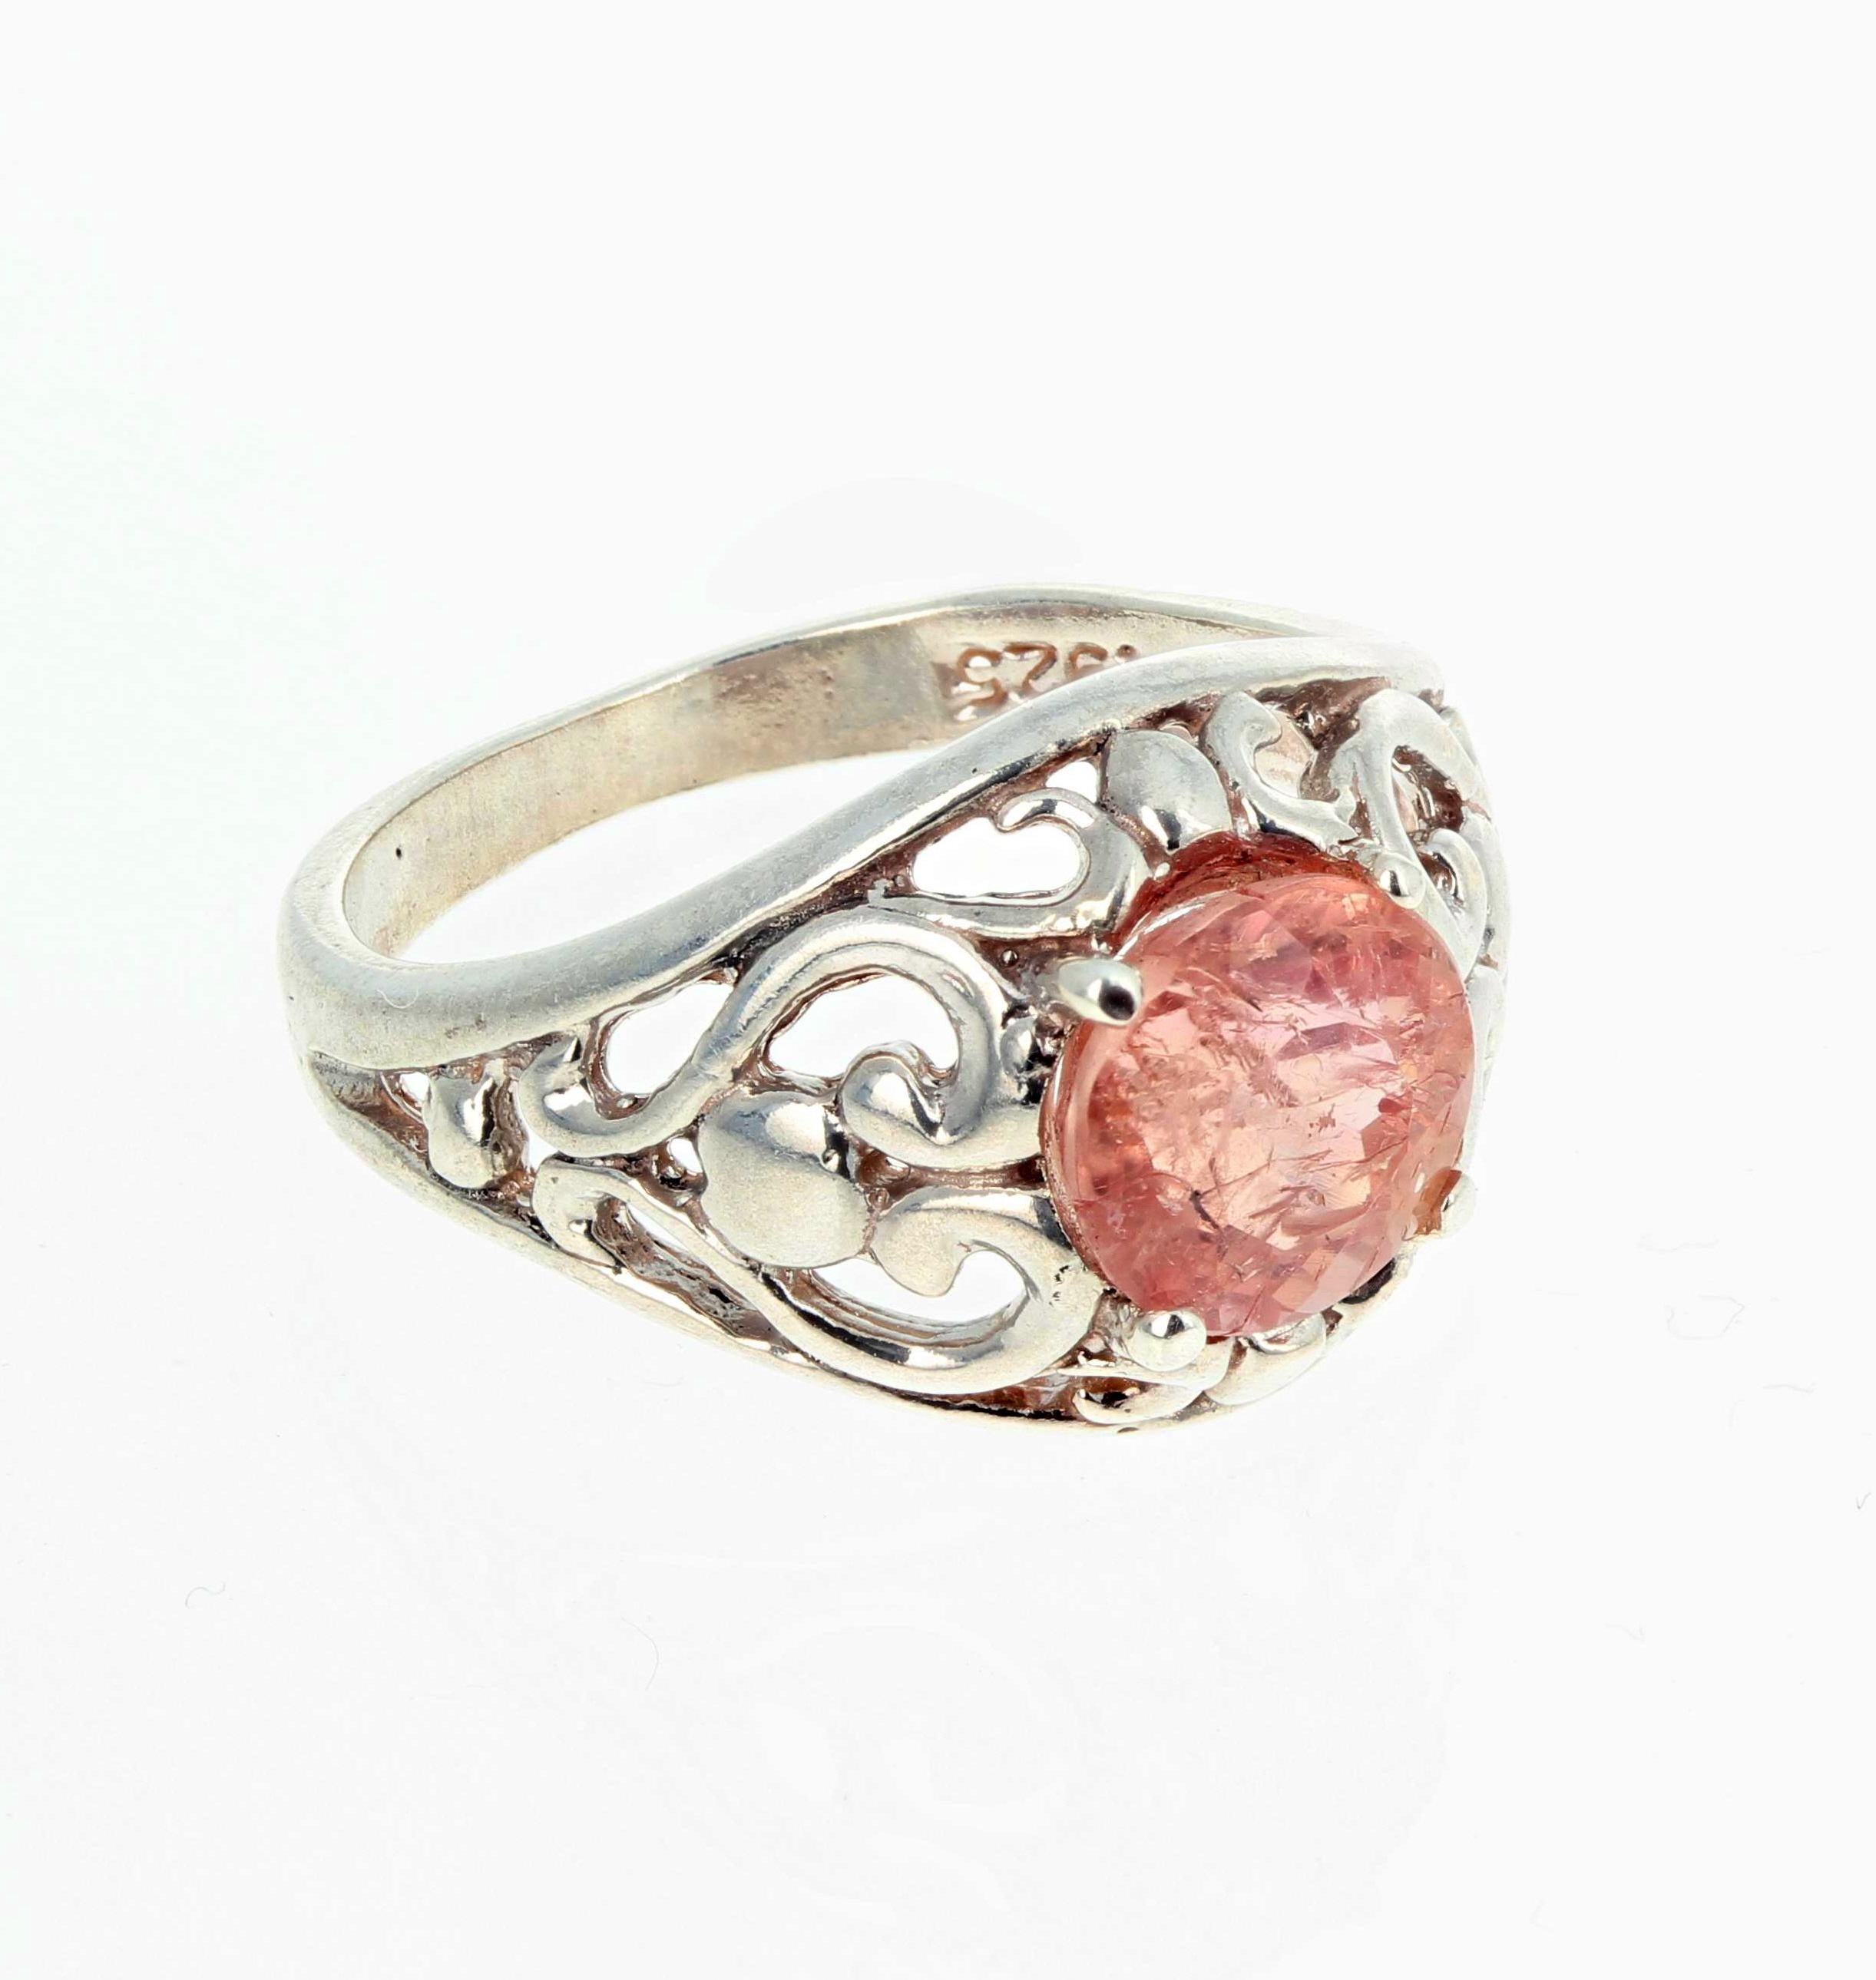 1.8 Carat Imperial Topaz Sterling Silver Ring 2